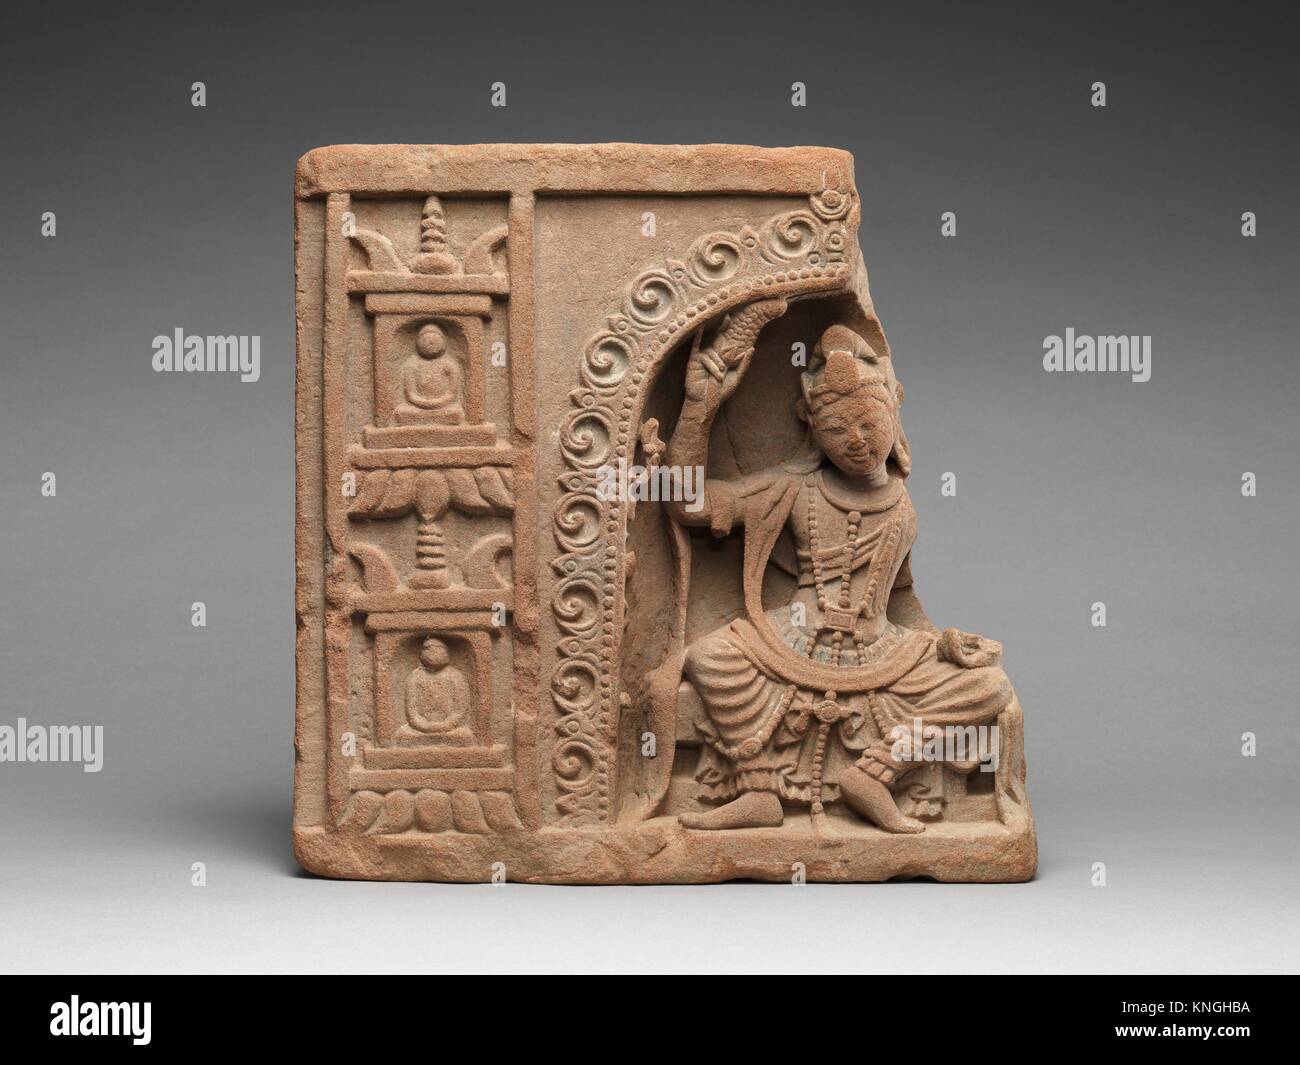 Bodhisattva. Period: Tang dynasty (618-907); Date: late 7th-early 8th century; Culture: China; Medium: Sandstone with traces of pigment; Dimensions: Stock Photo